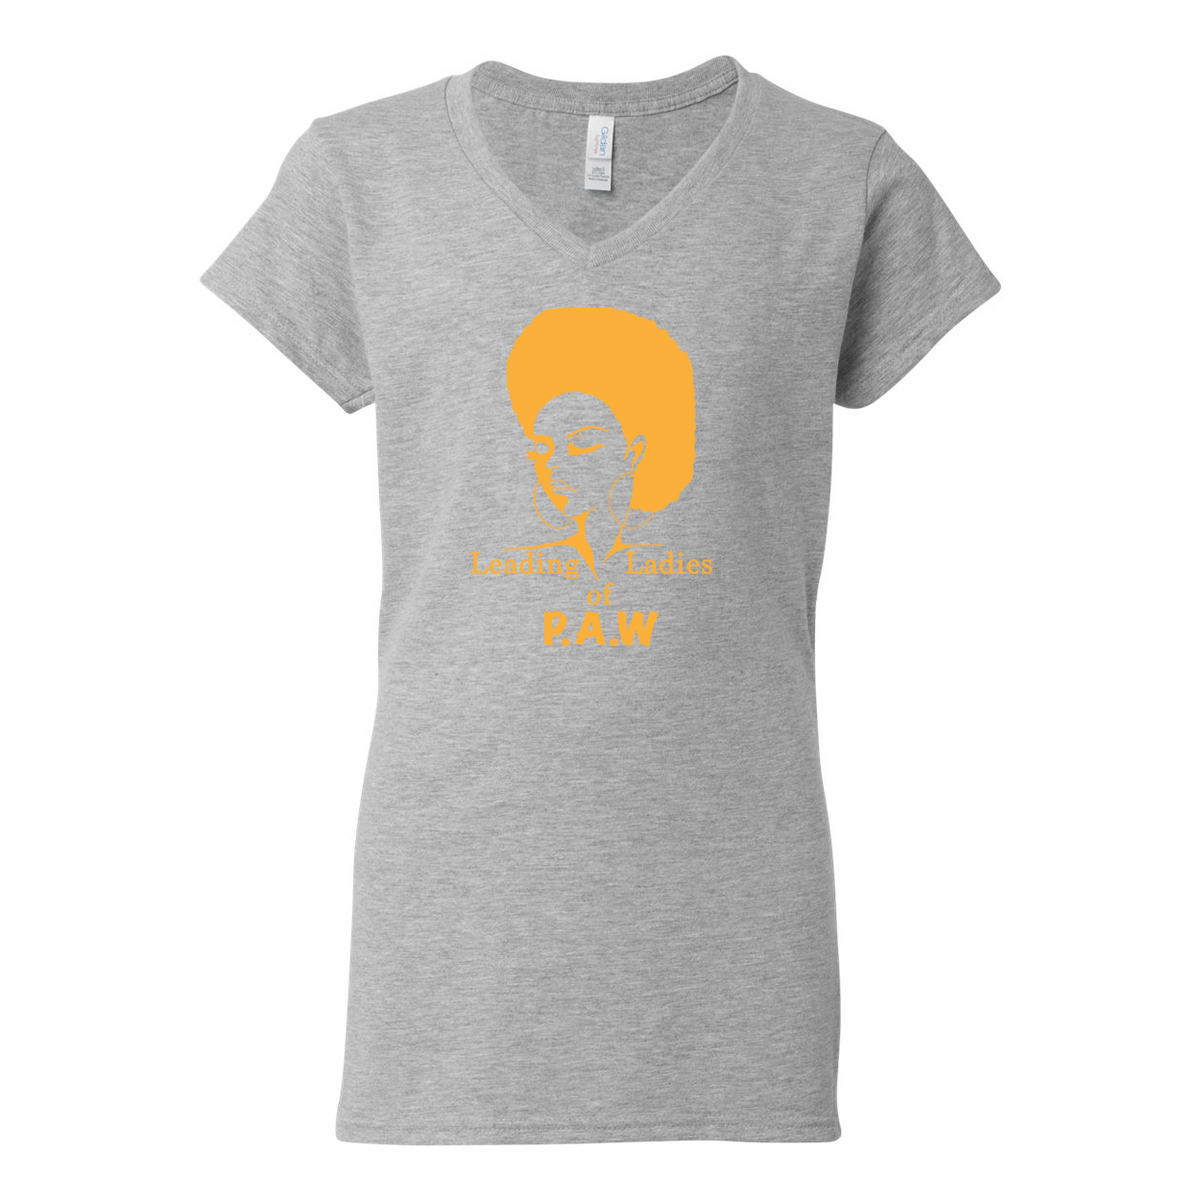 Leading Ladies of P.A.W. Softstyle Women's V-Neck T-Shirt